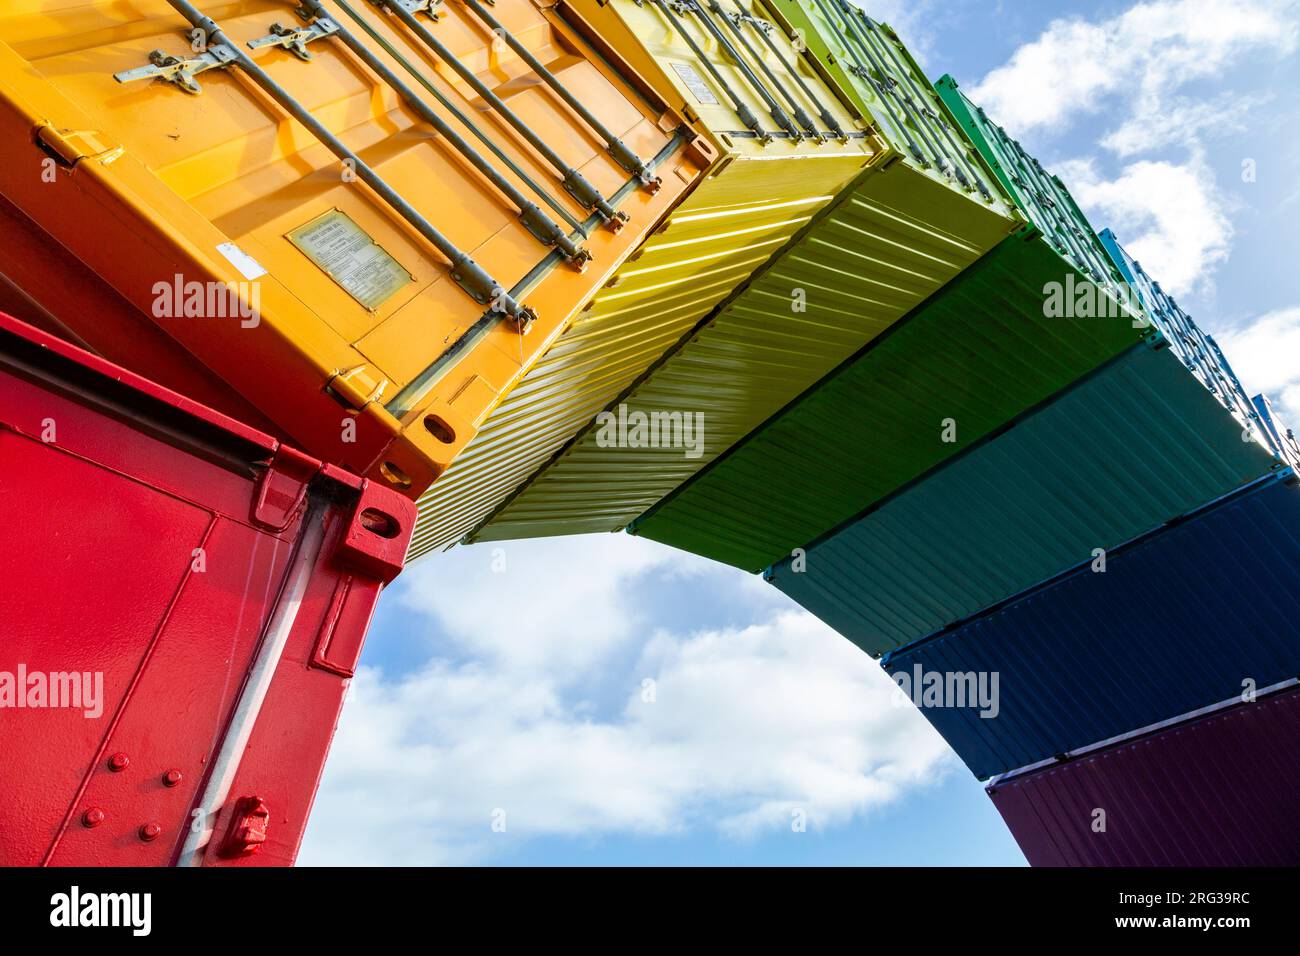 Containbow - a rainbow arch shipping container sculpture installation by Marcus Canning. Stock Photo